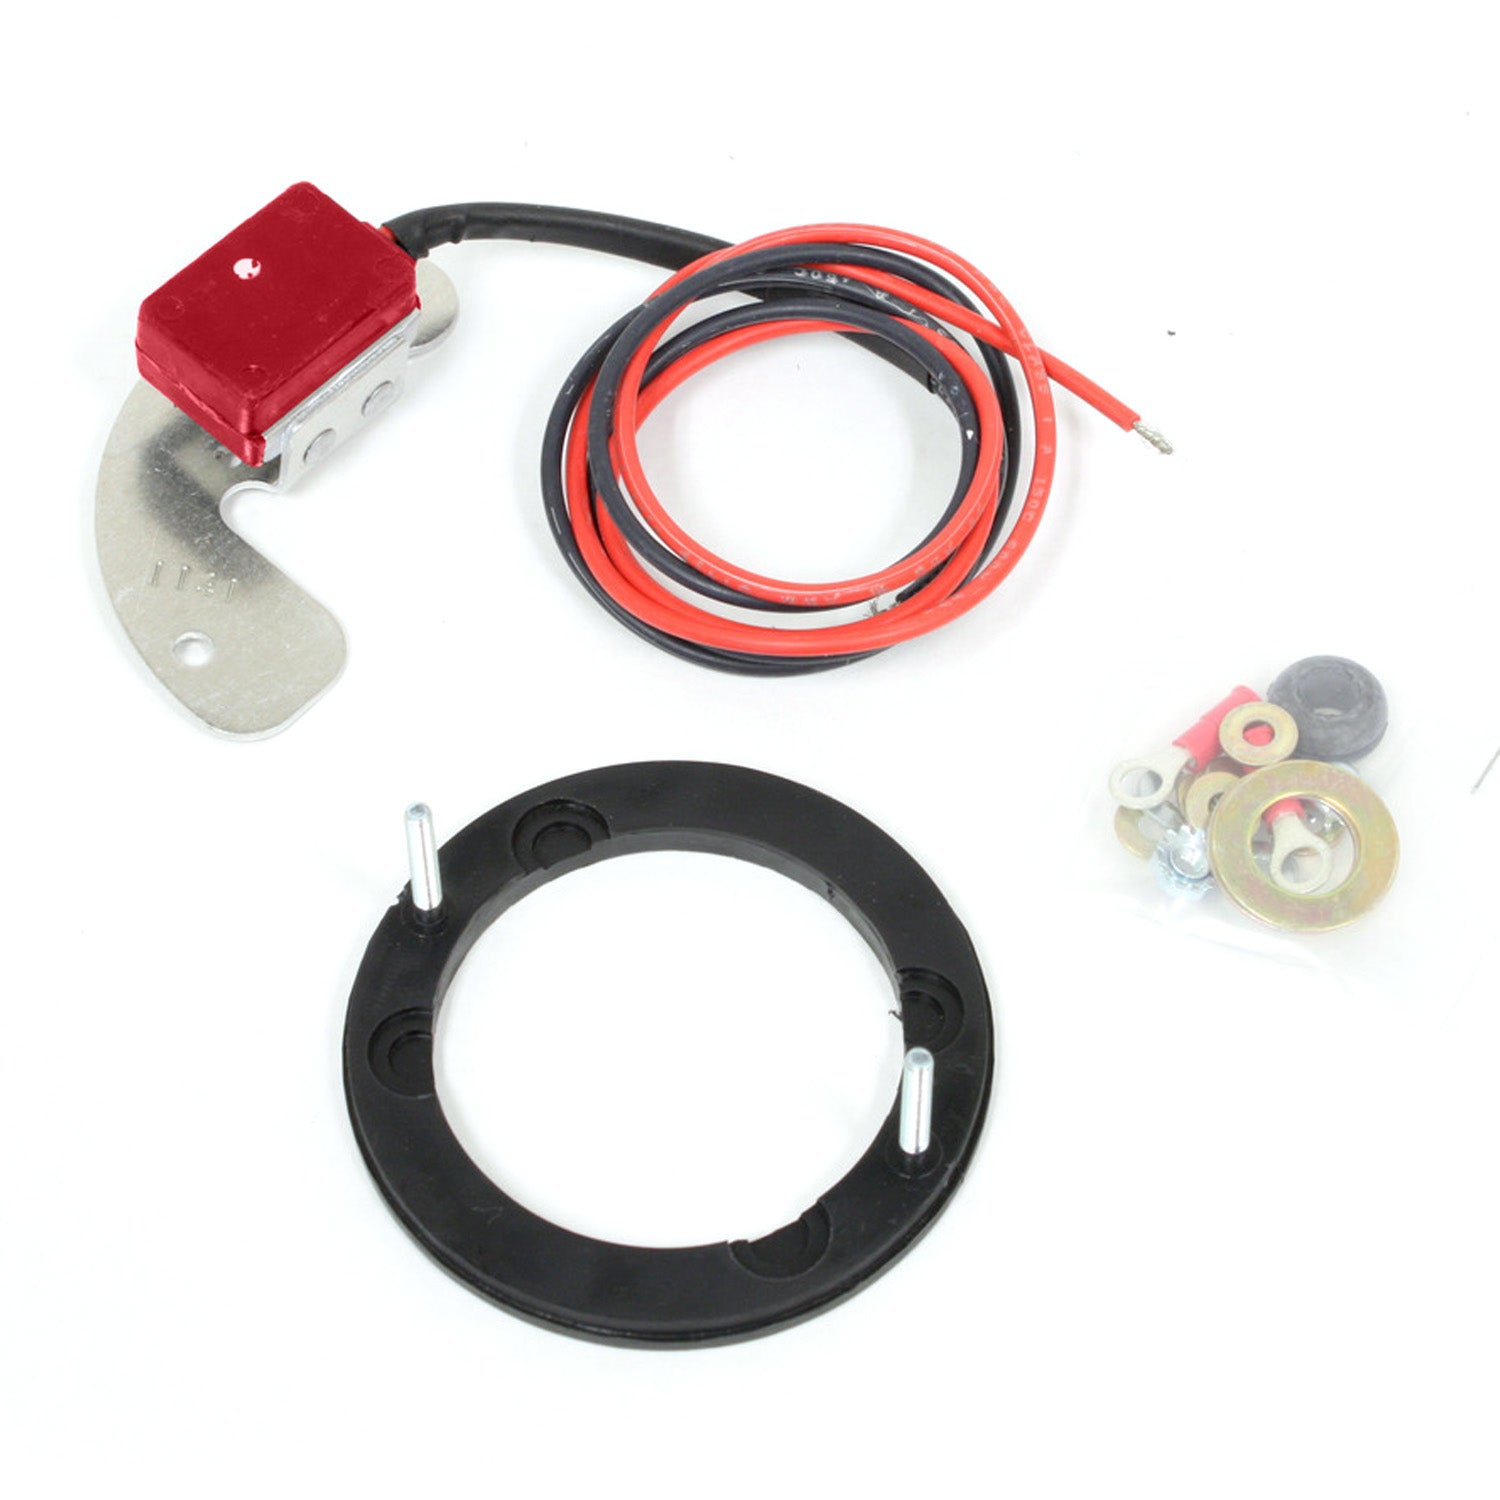 PerTronix 91141 Ignitor® II Delco 4 cyl Scout International Electronic  Ignition Conversion Kit